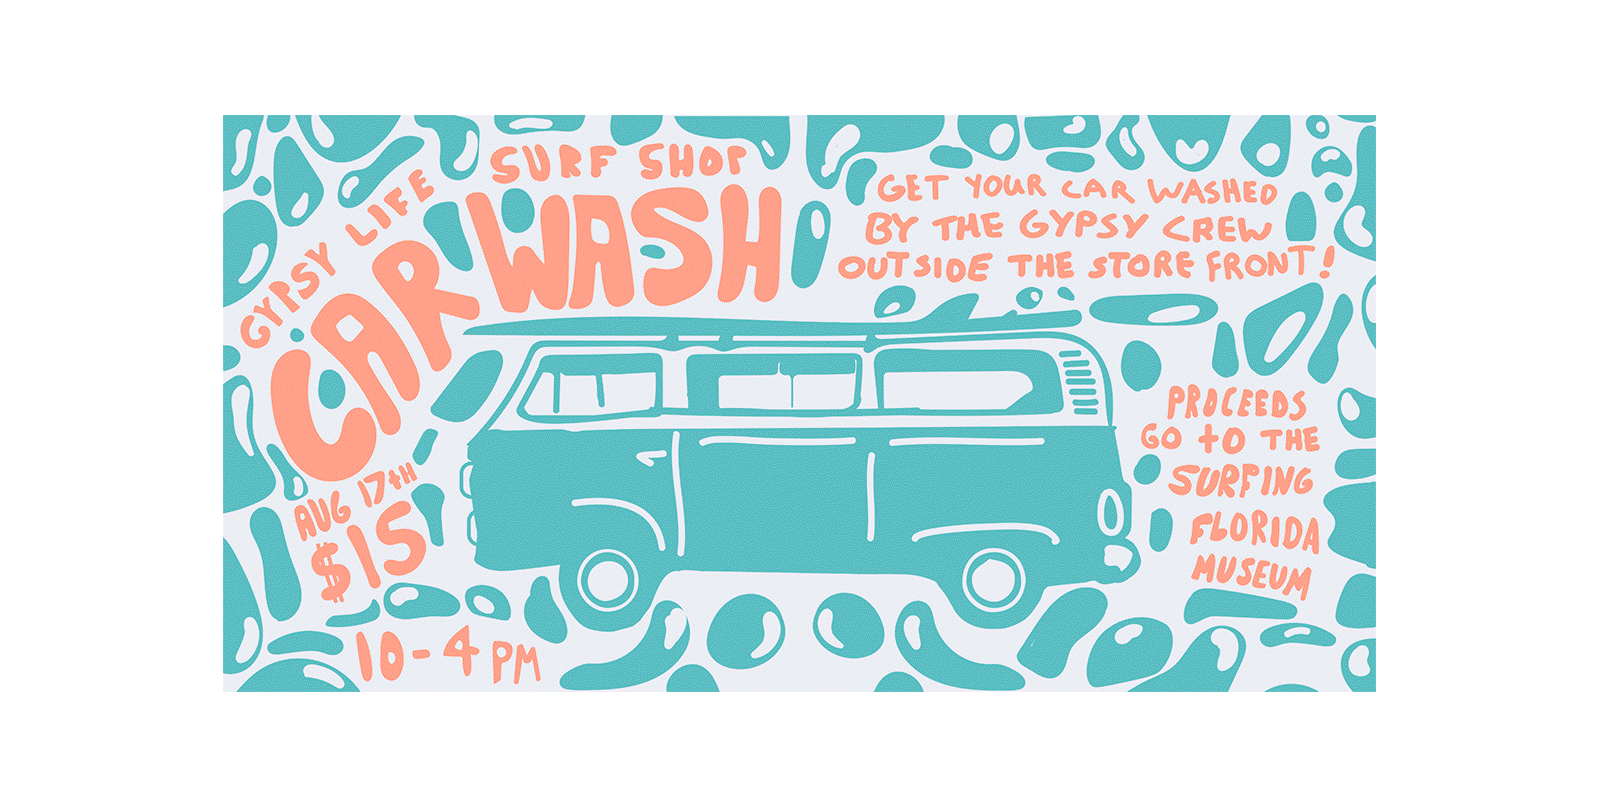 Collage of social media posts for Gypsy Life Surf Shop, including their Coffee Corner, Car Wash, Ukulele Lessons, Black Friday, and Jam Sesh events. Graphics are colorful and include hand lettering and illustrations.